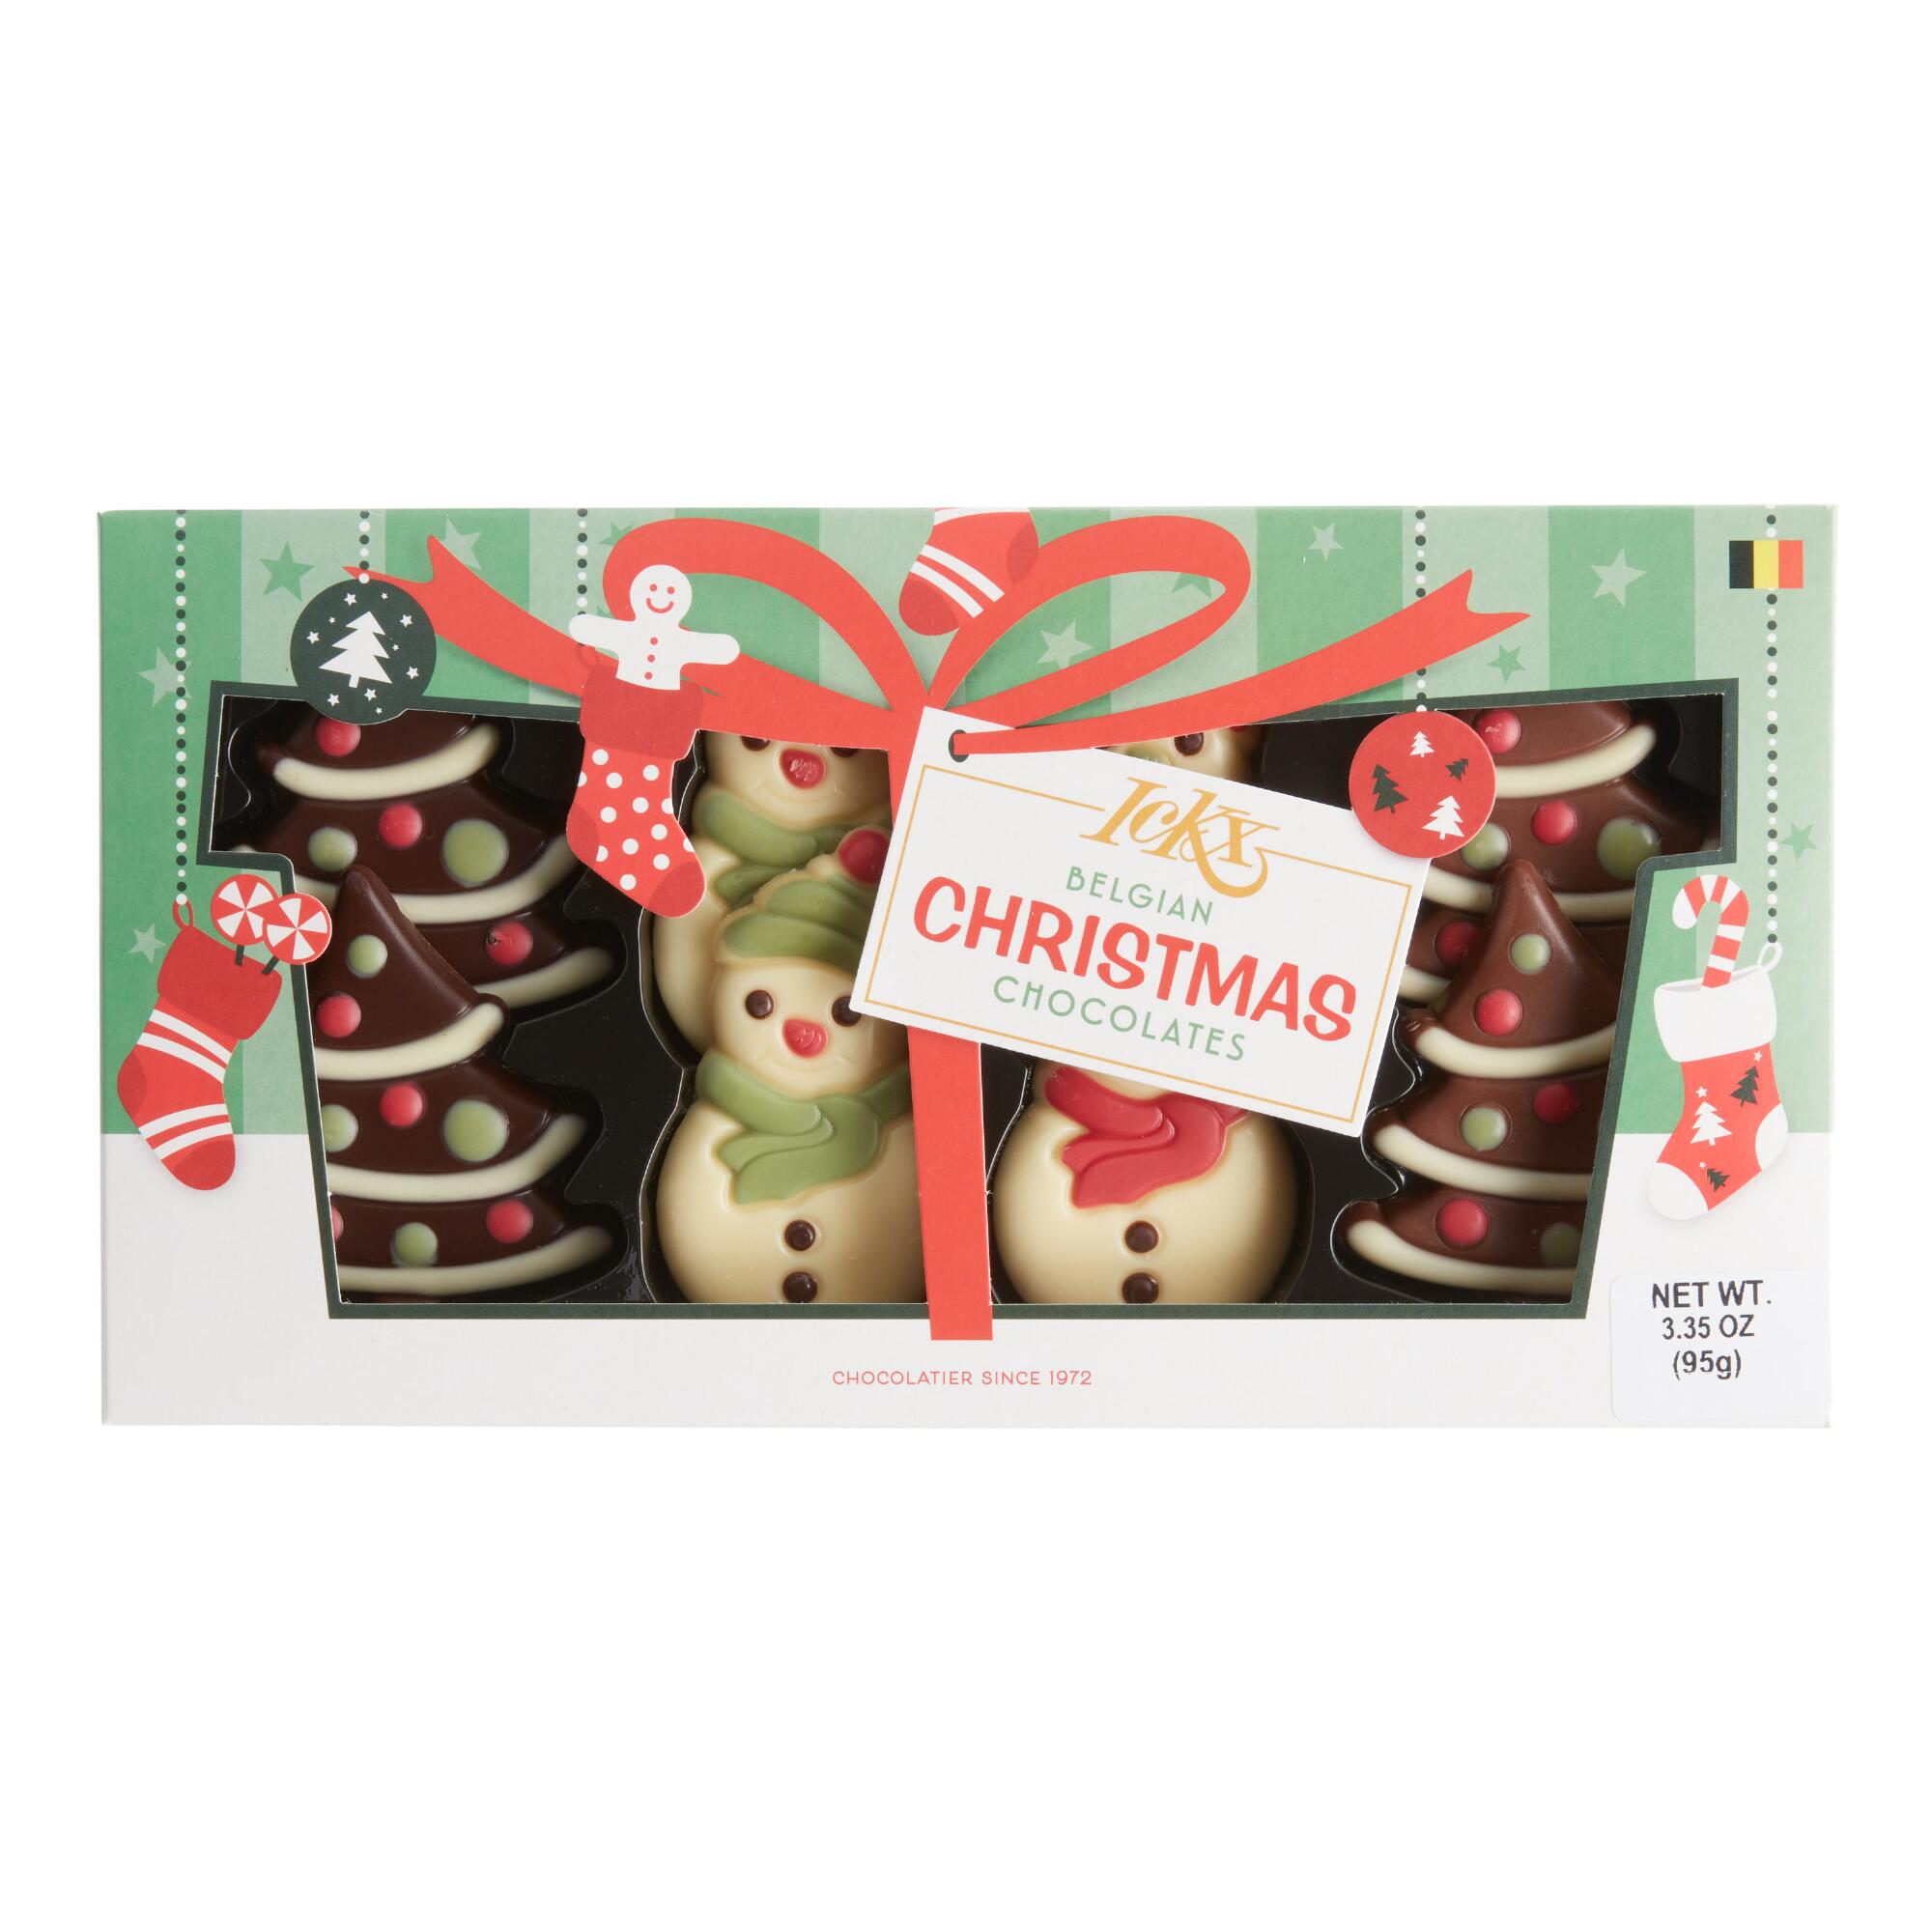 ICKX Snowman And Christmas Tree Belgian Chocolates by World Market